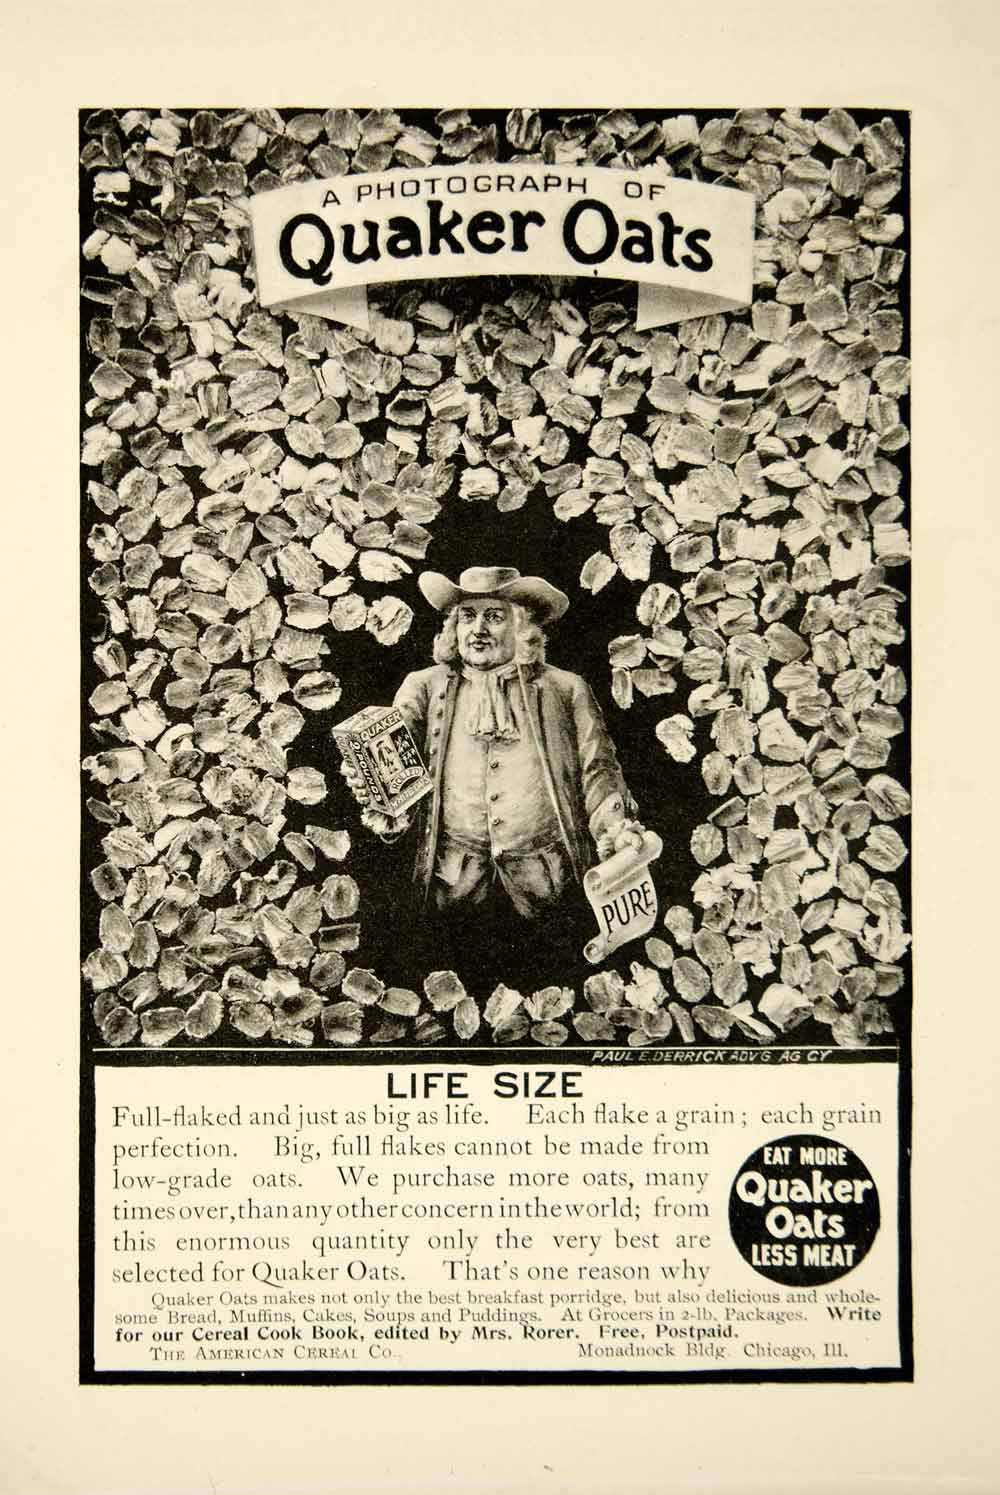 1900 Ad Quaker Oats Man Advertising Icon Breakfast Cereal Life Size Image YSN2